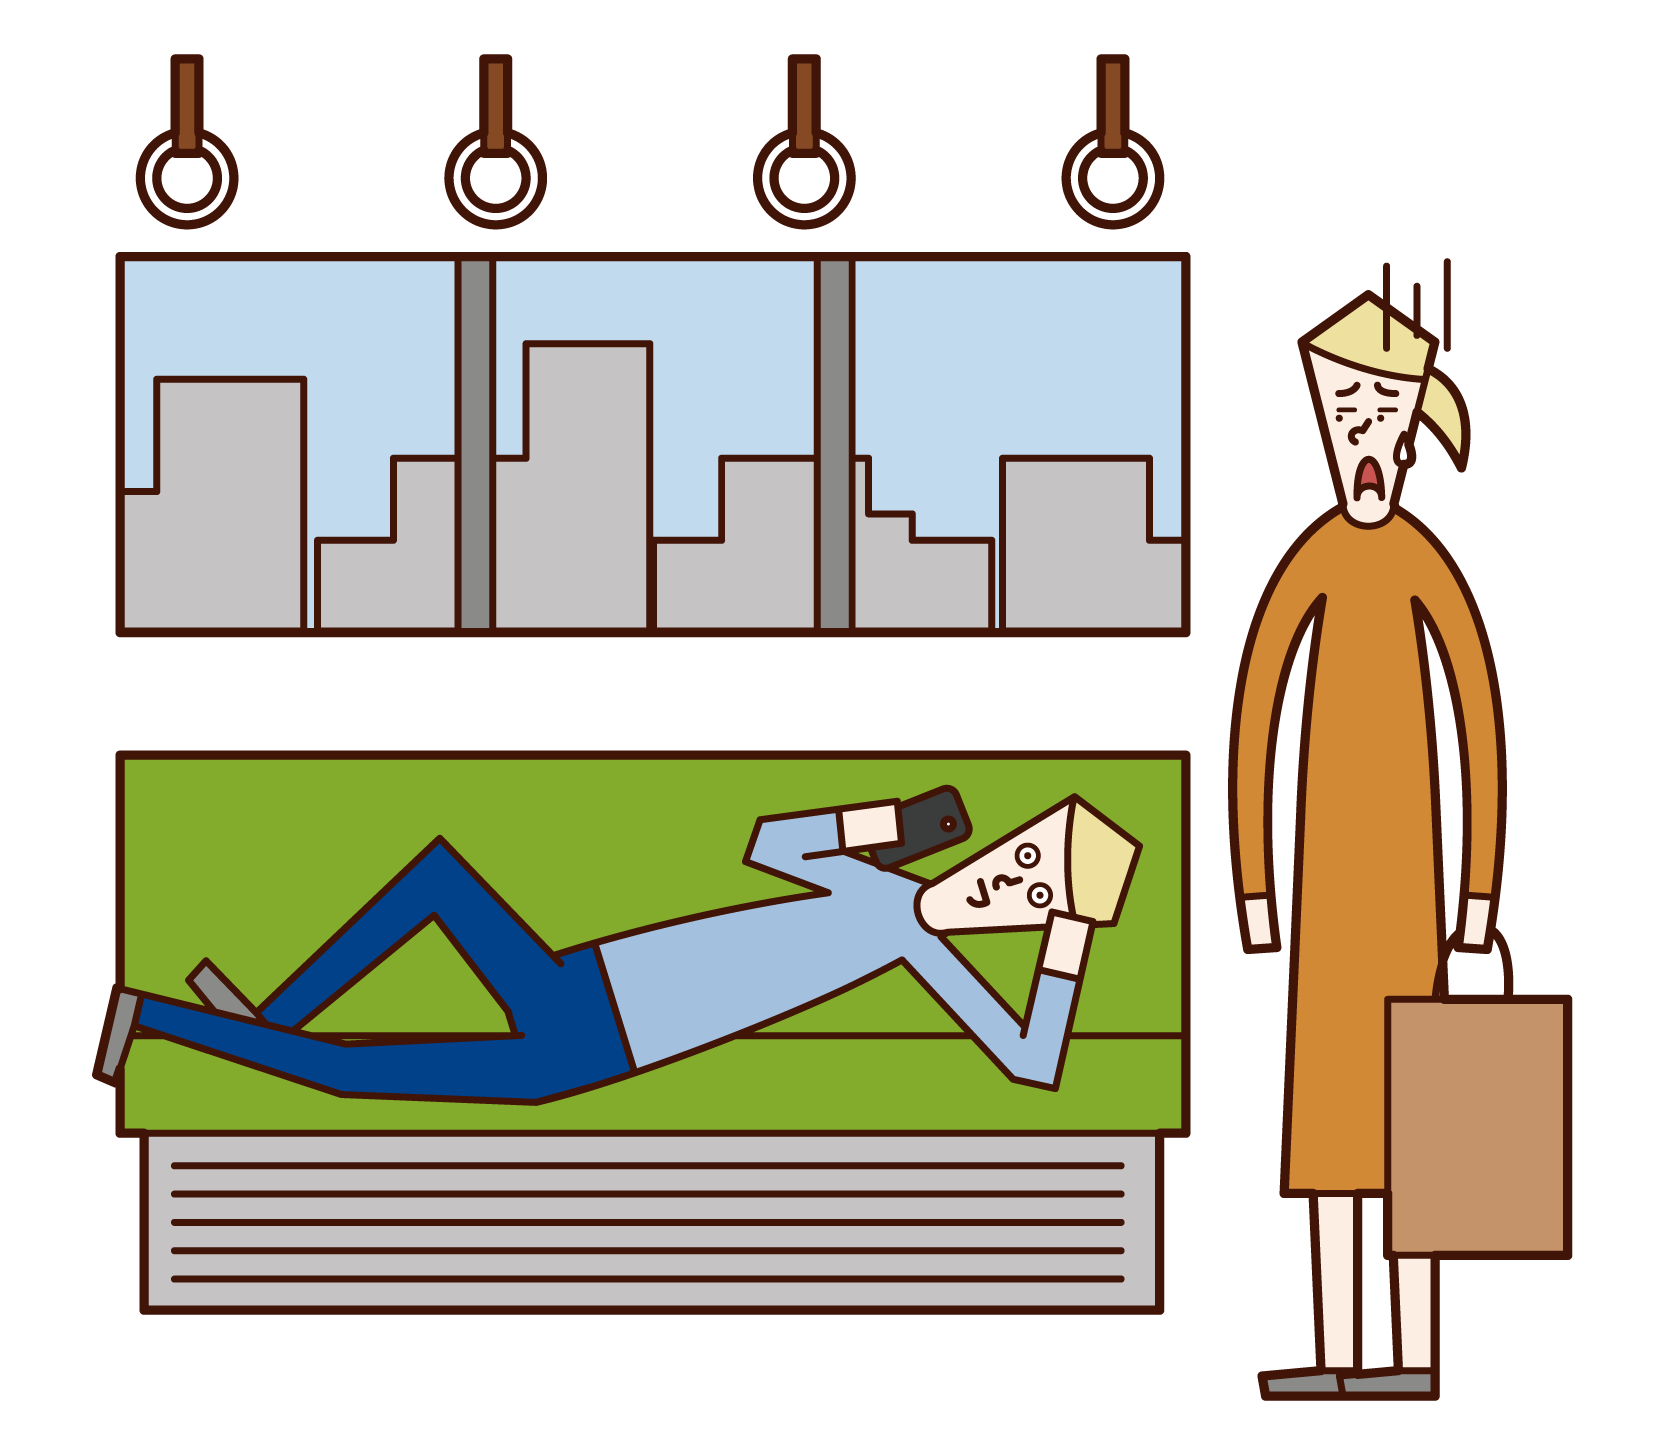 Illustration of a man lying in a seat on a train